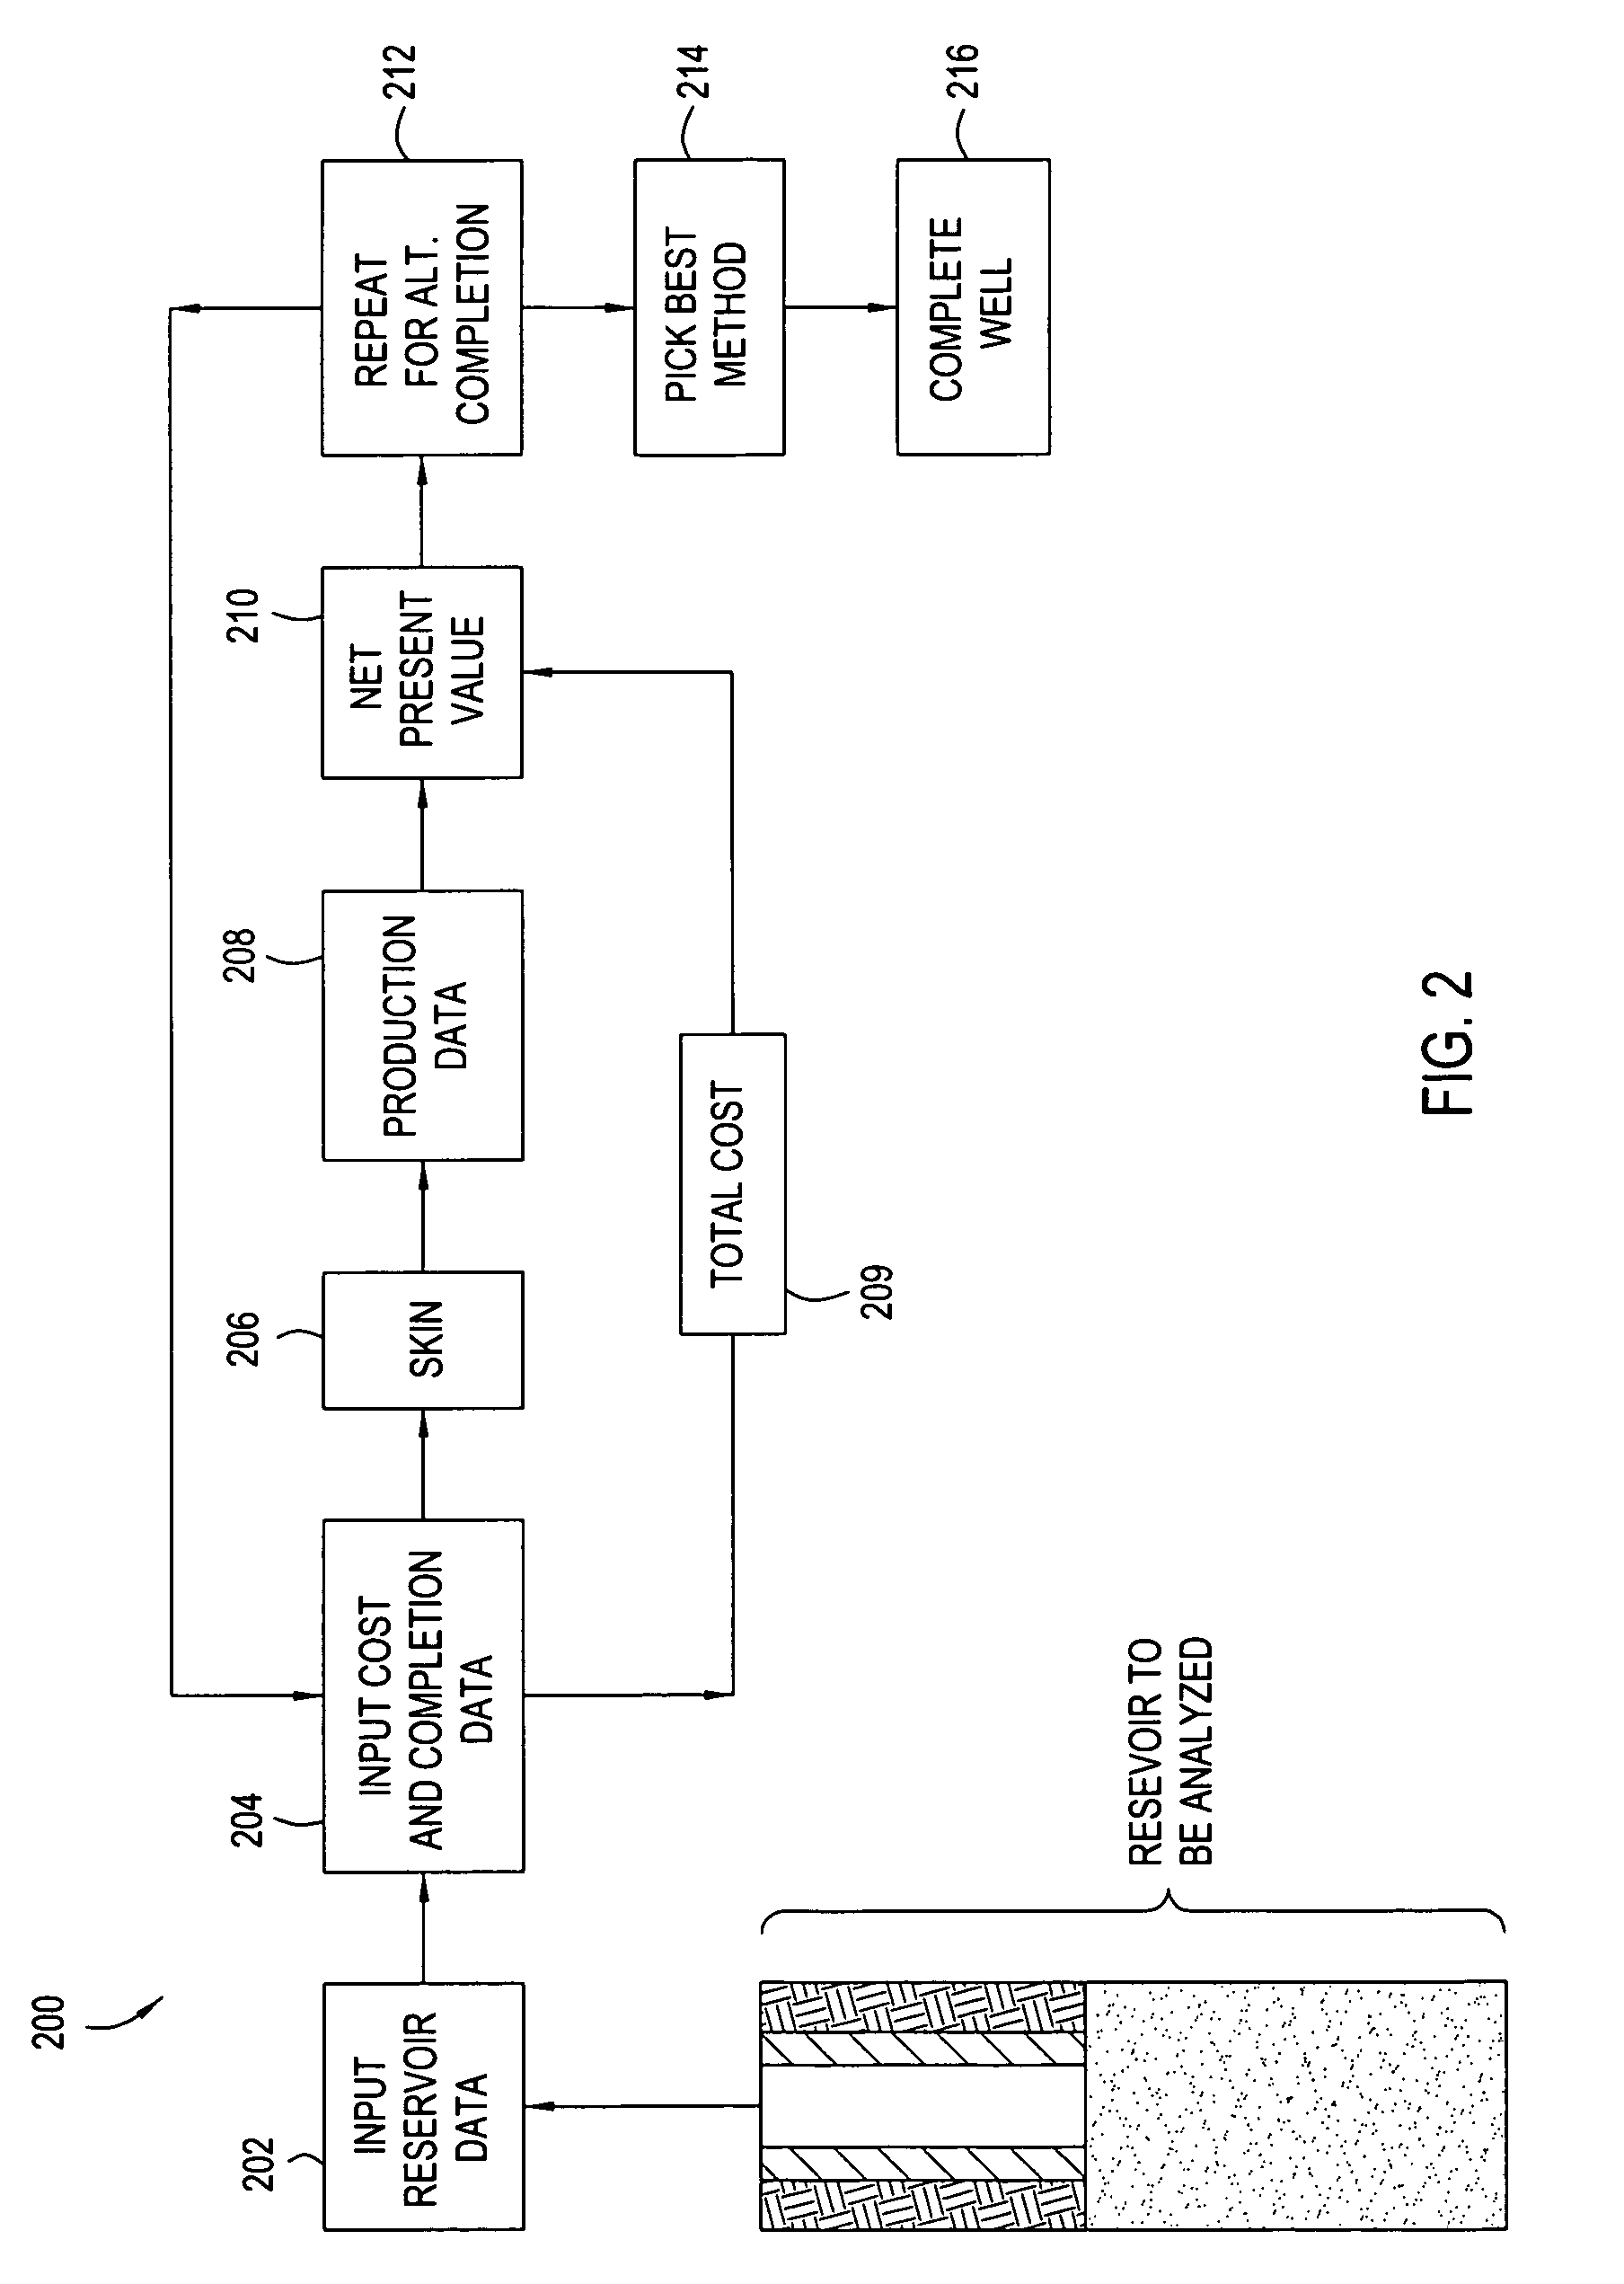 System for evaluating over and underbalanced drilling operations